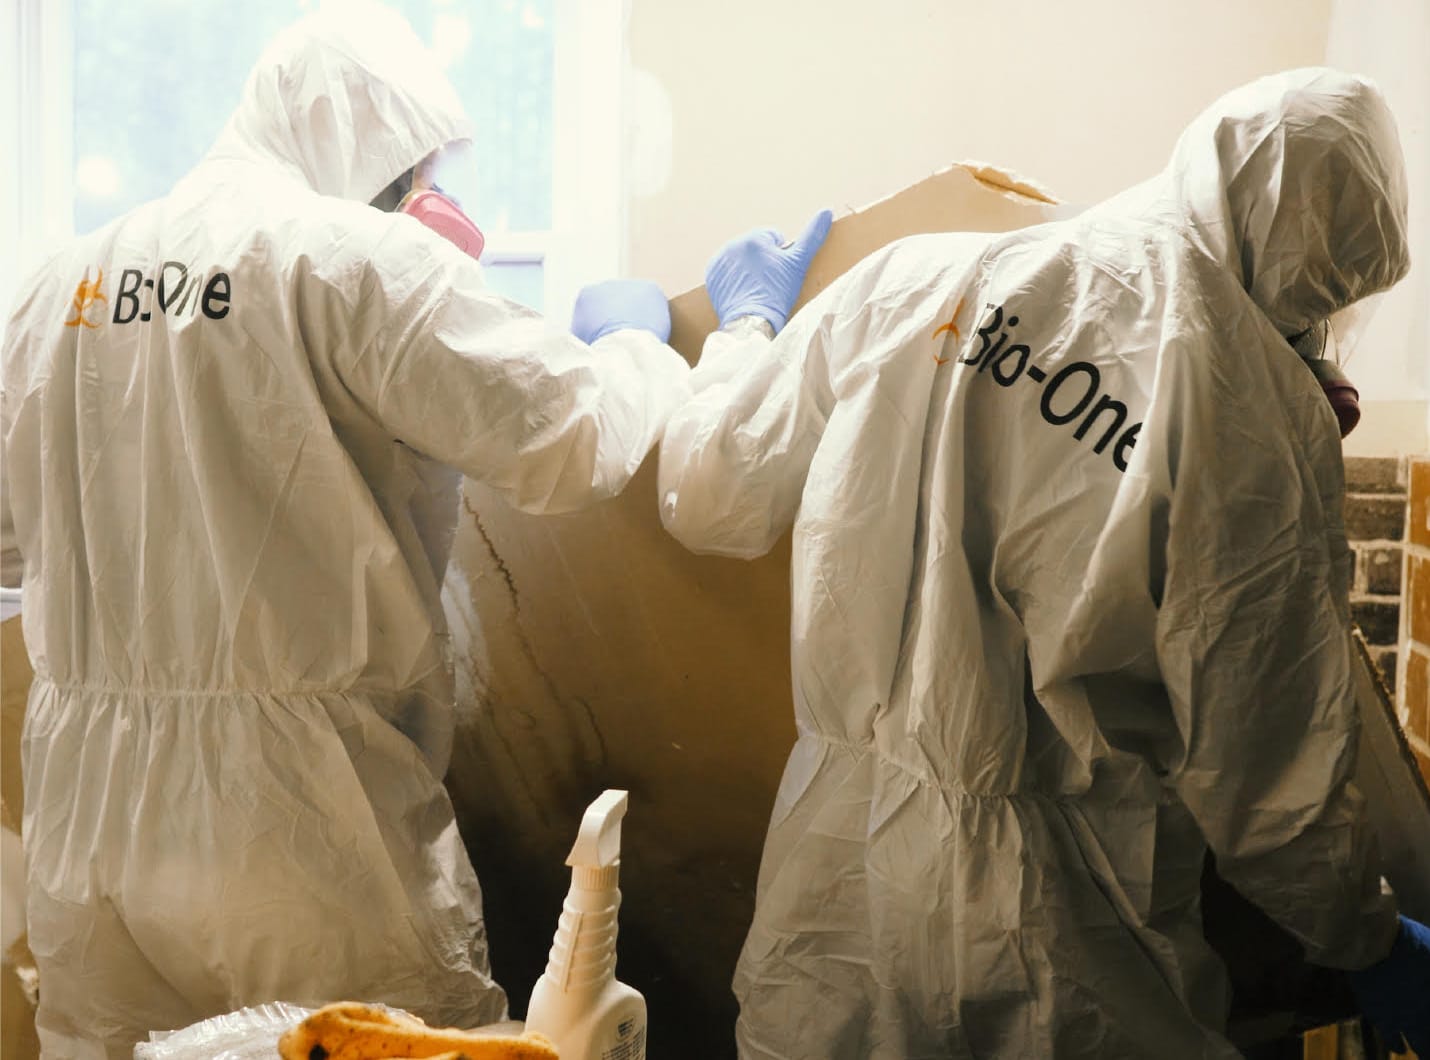 Death, Crime Scene, Biohazard & Hoarding Clean Up Services for Moreno Valley